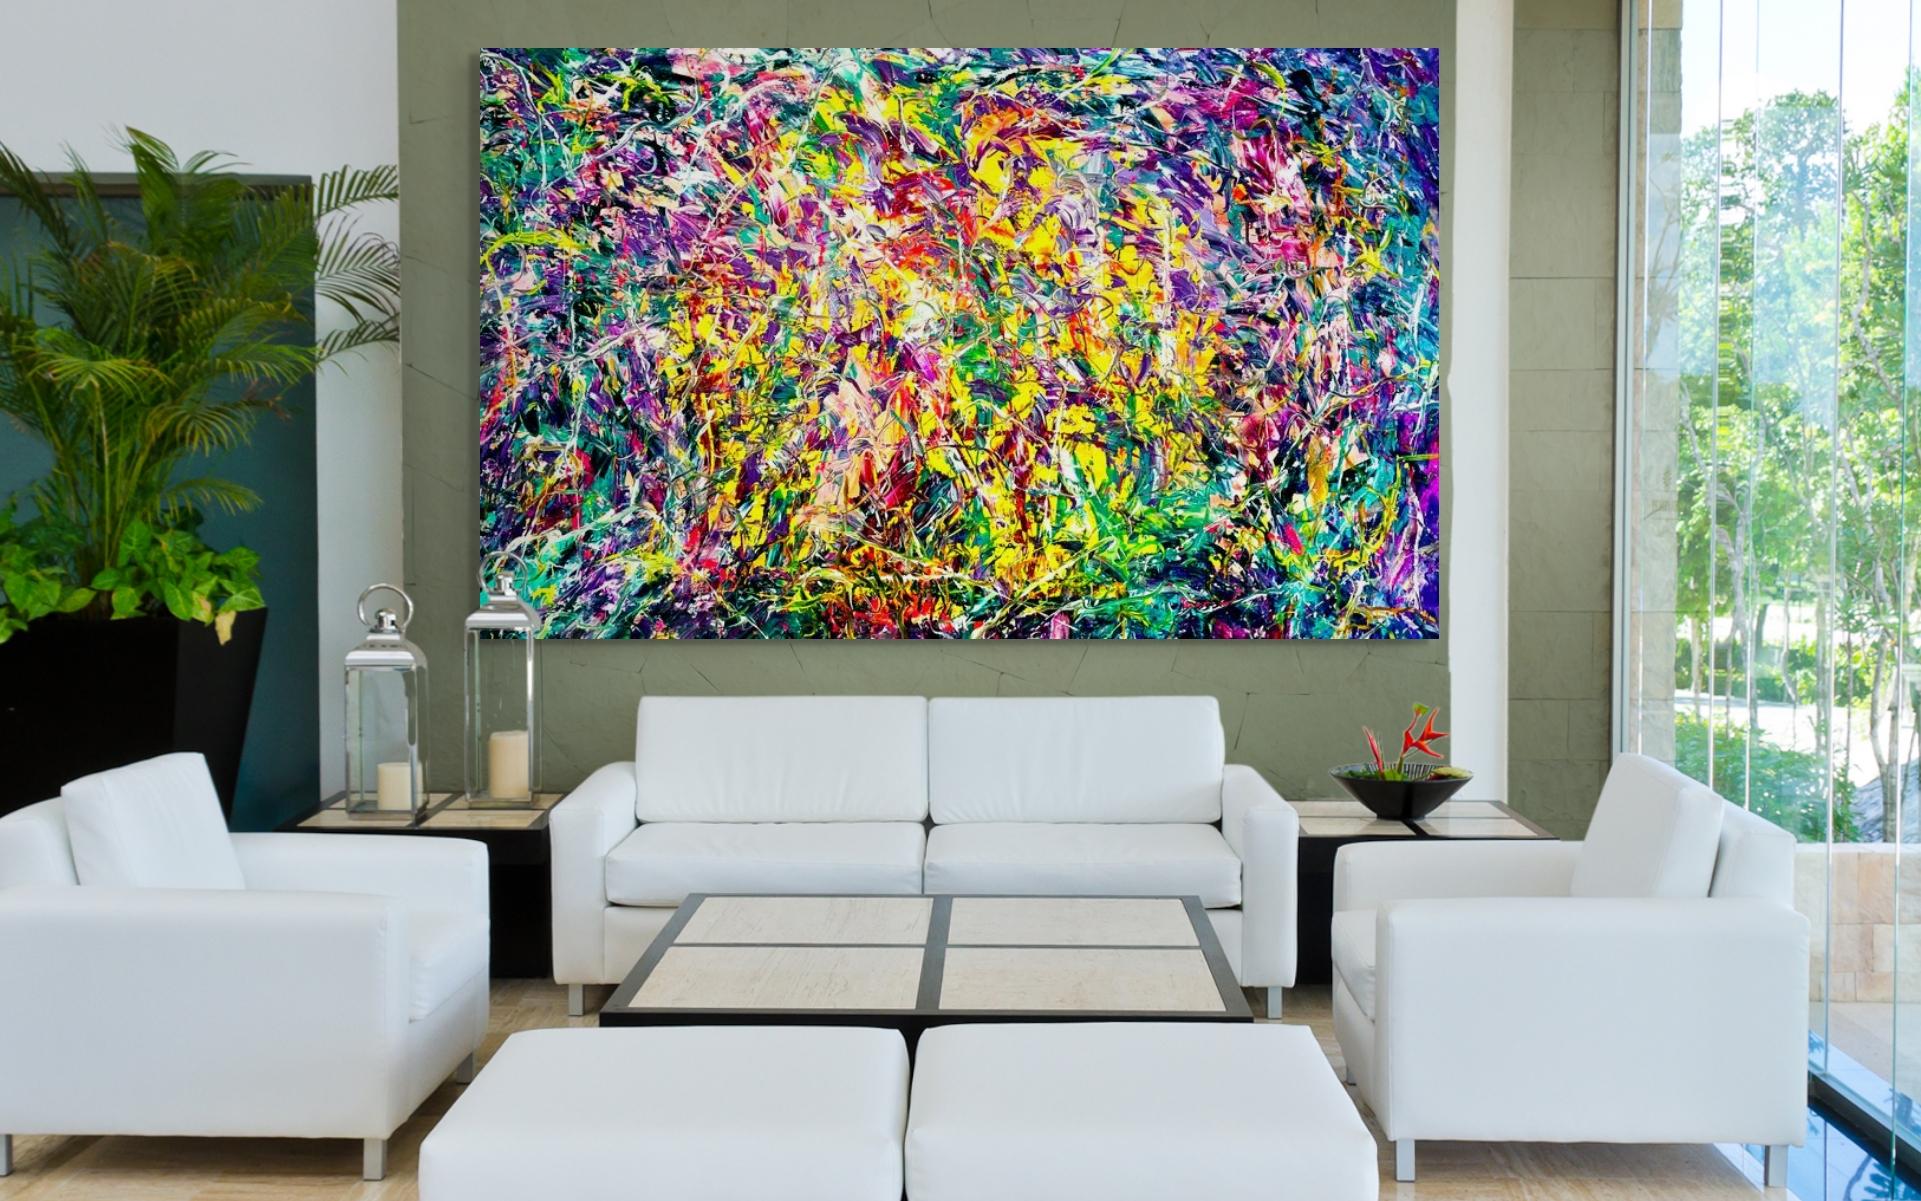 Life's Long Winding Road - Abstract Expressionist Painting by Estelle Asmodelle